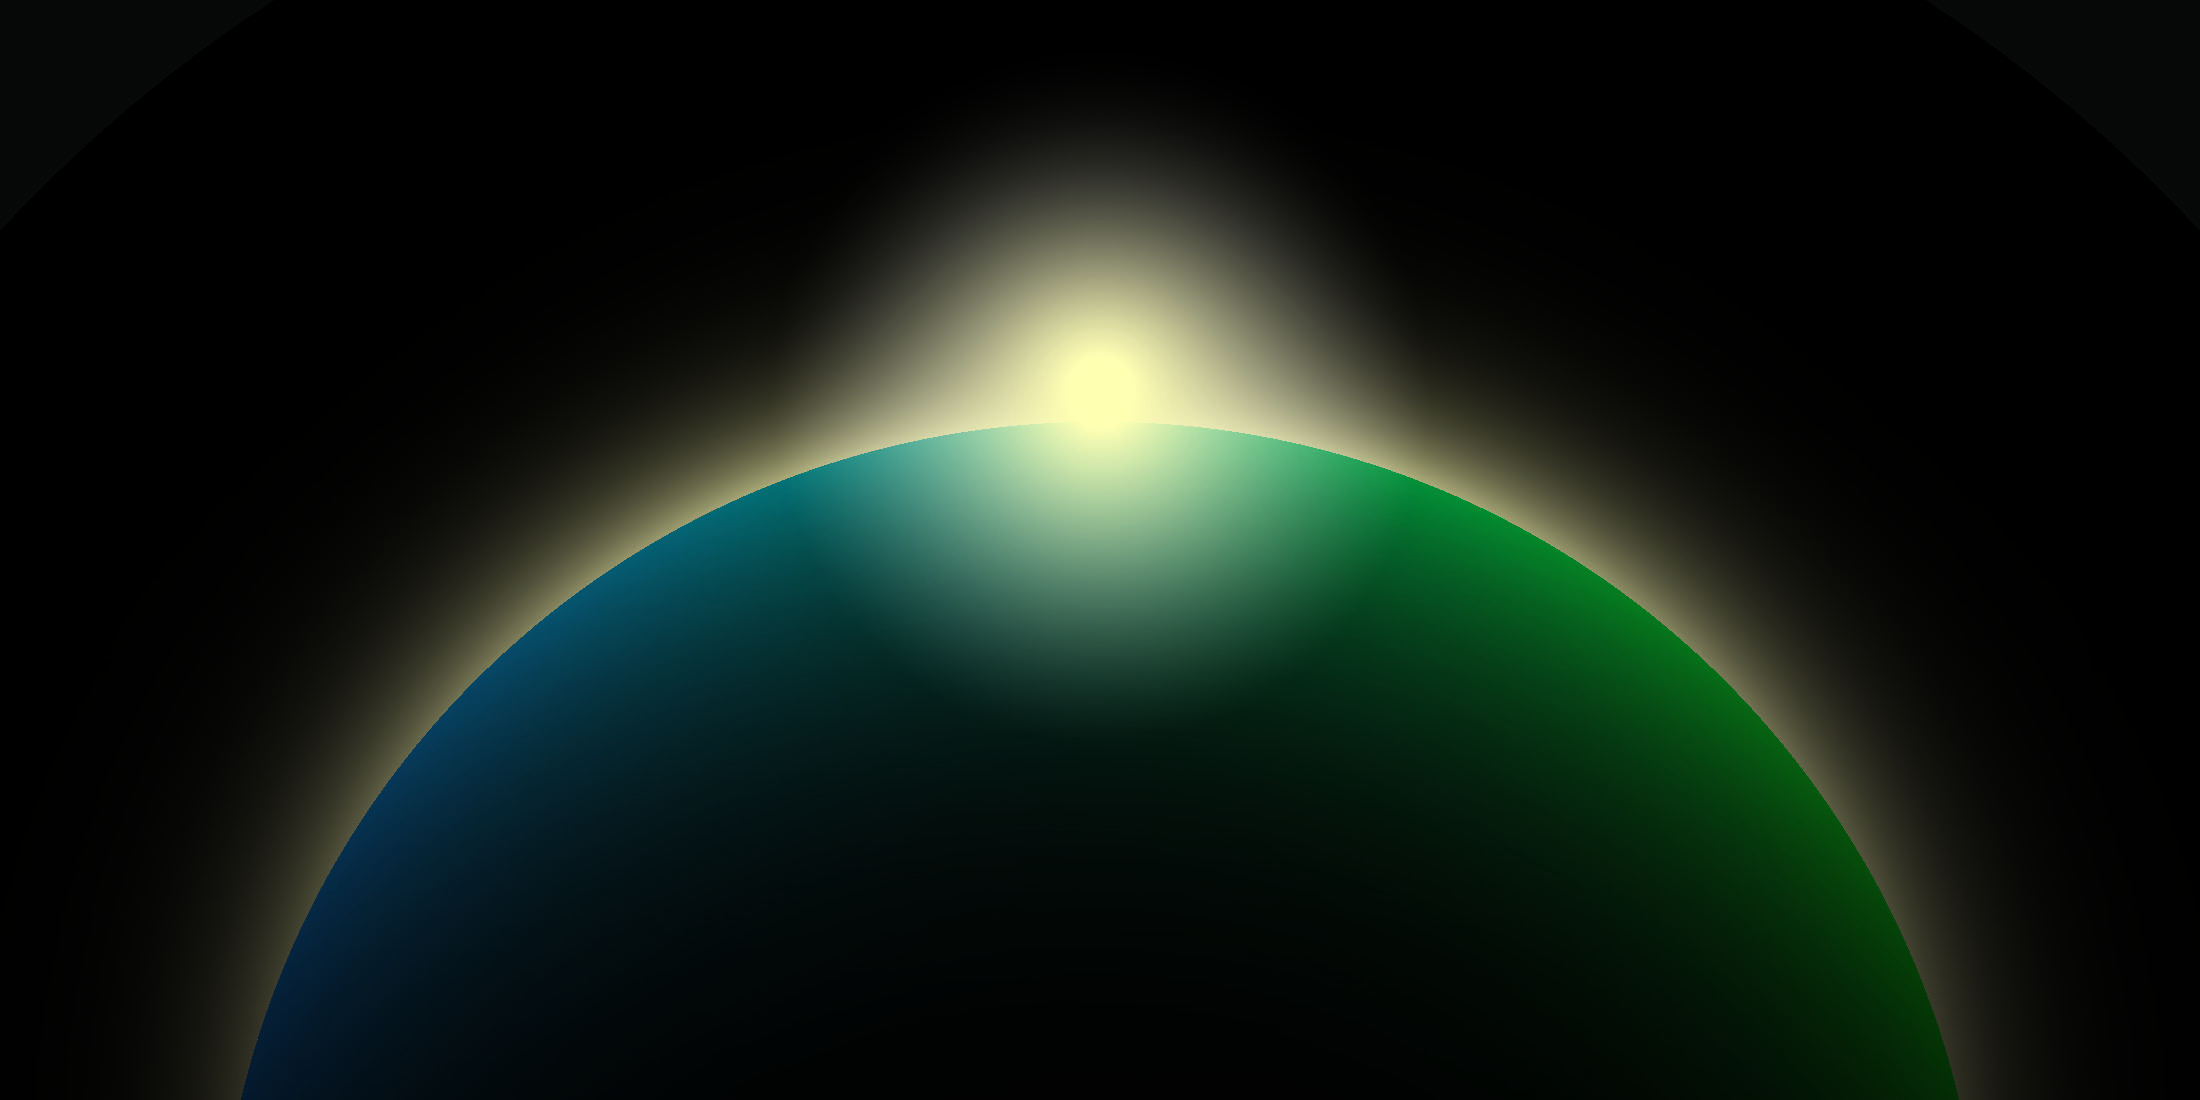 The edge of a planet backlit by the sun